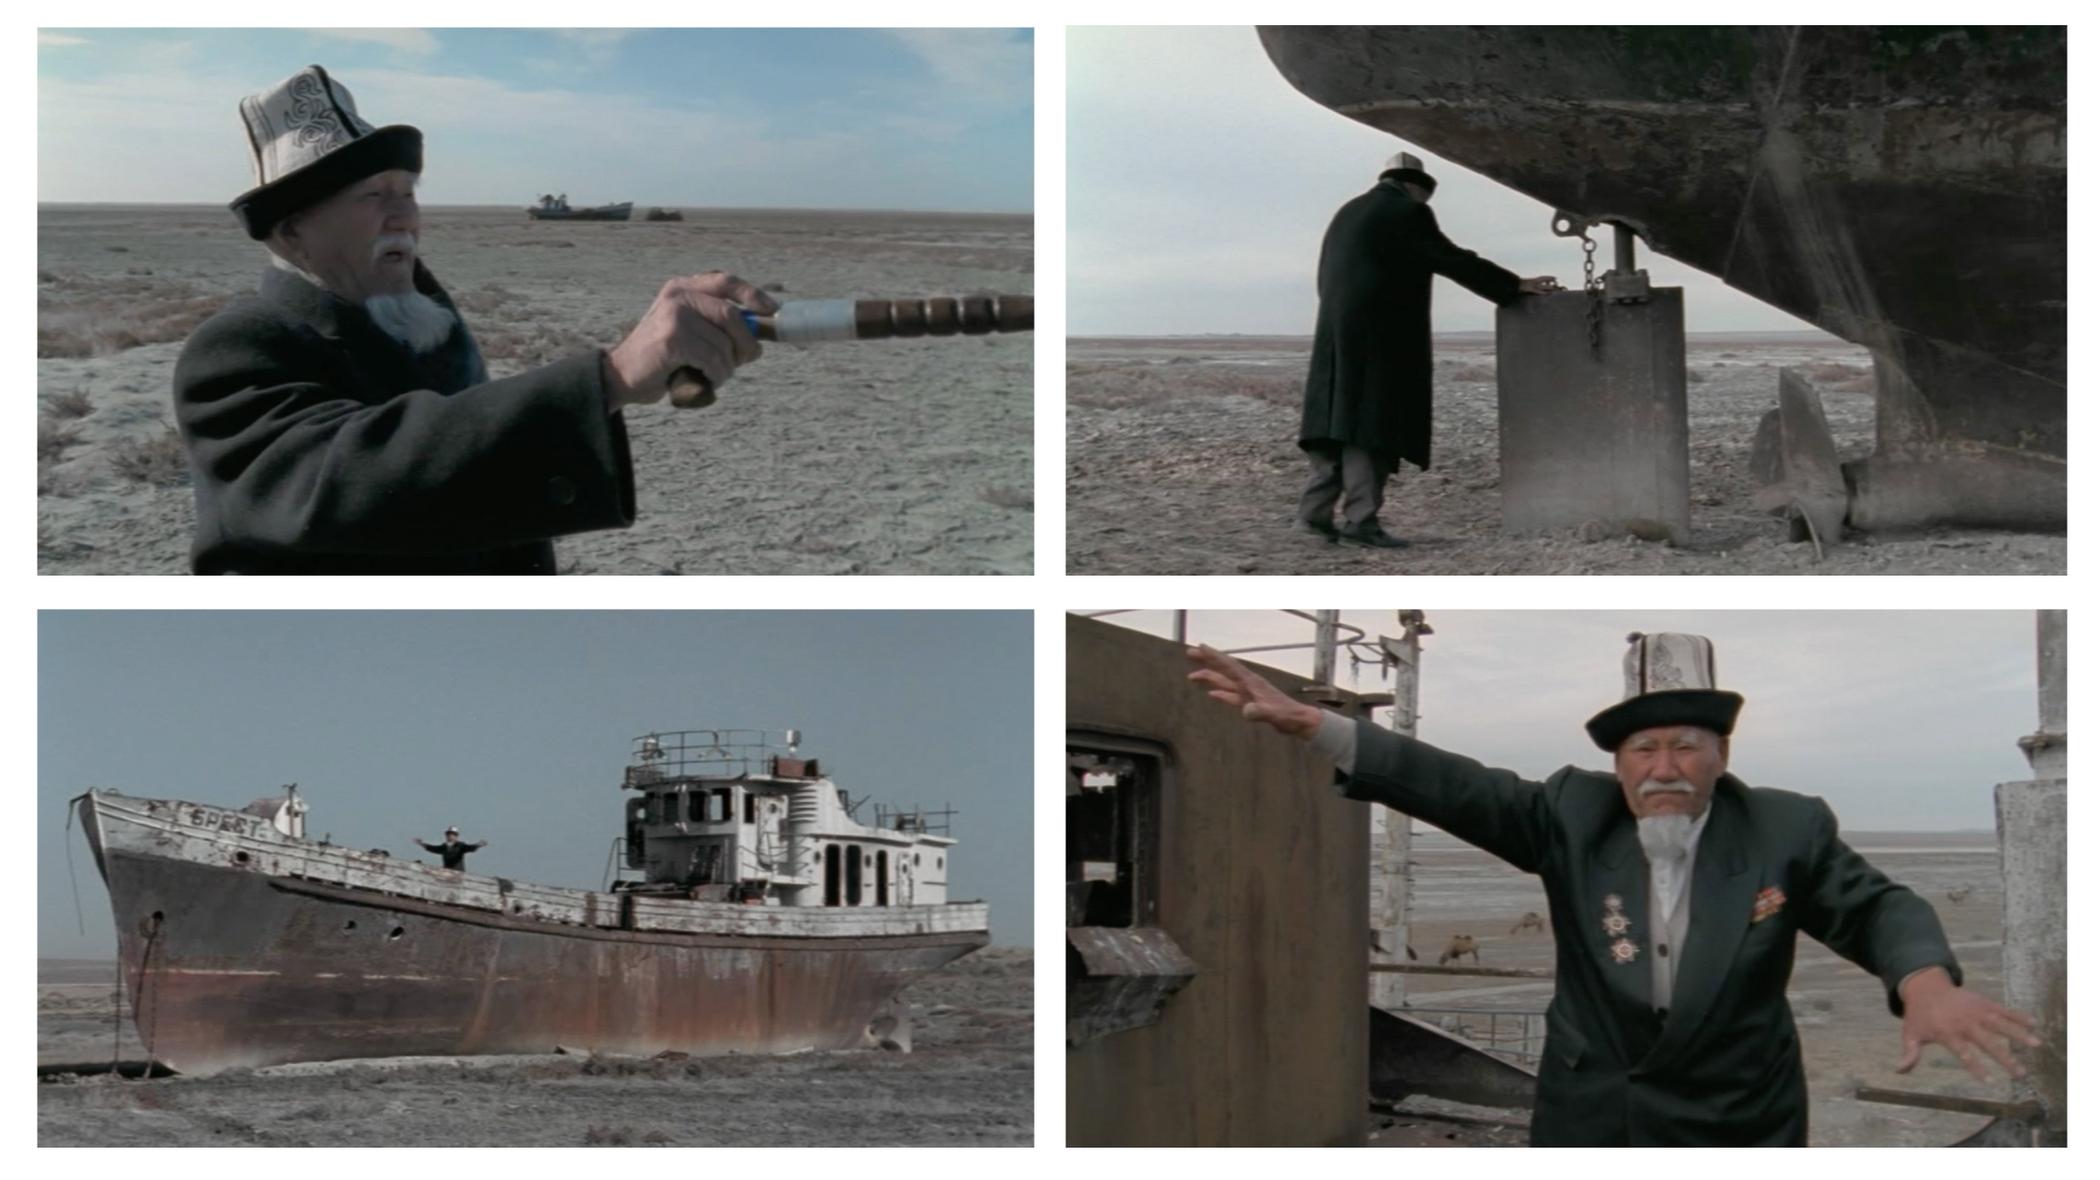 Figure 1: A tableau of four screenshots from Udo Maurer’s film Über Wasser: Menschen und gelbe Kanister (On Water: People and Yellow Cans, 2007). Clockwise: a medium closeup of an old man wearing a traditional hat and pointing his walking stick at something outside the frame. The man touching the rudder of an old boat stranded on land. A shot of the ship from the distance. A medium shot of the man gesturing with his arms on the ship’s deck.